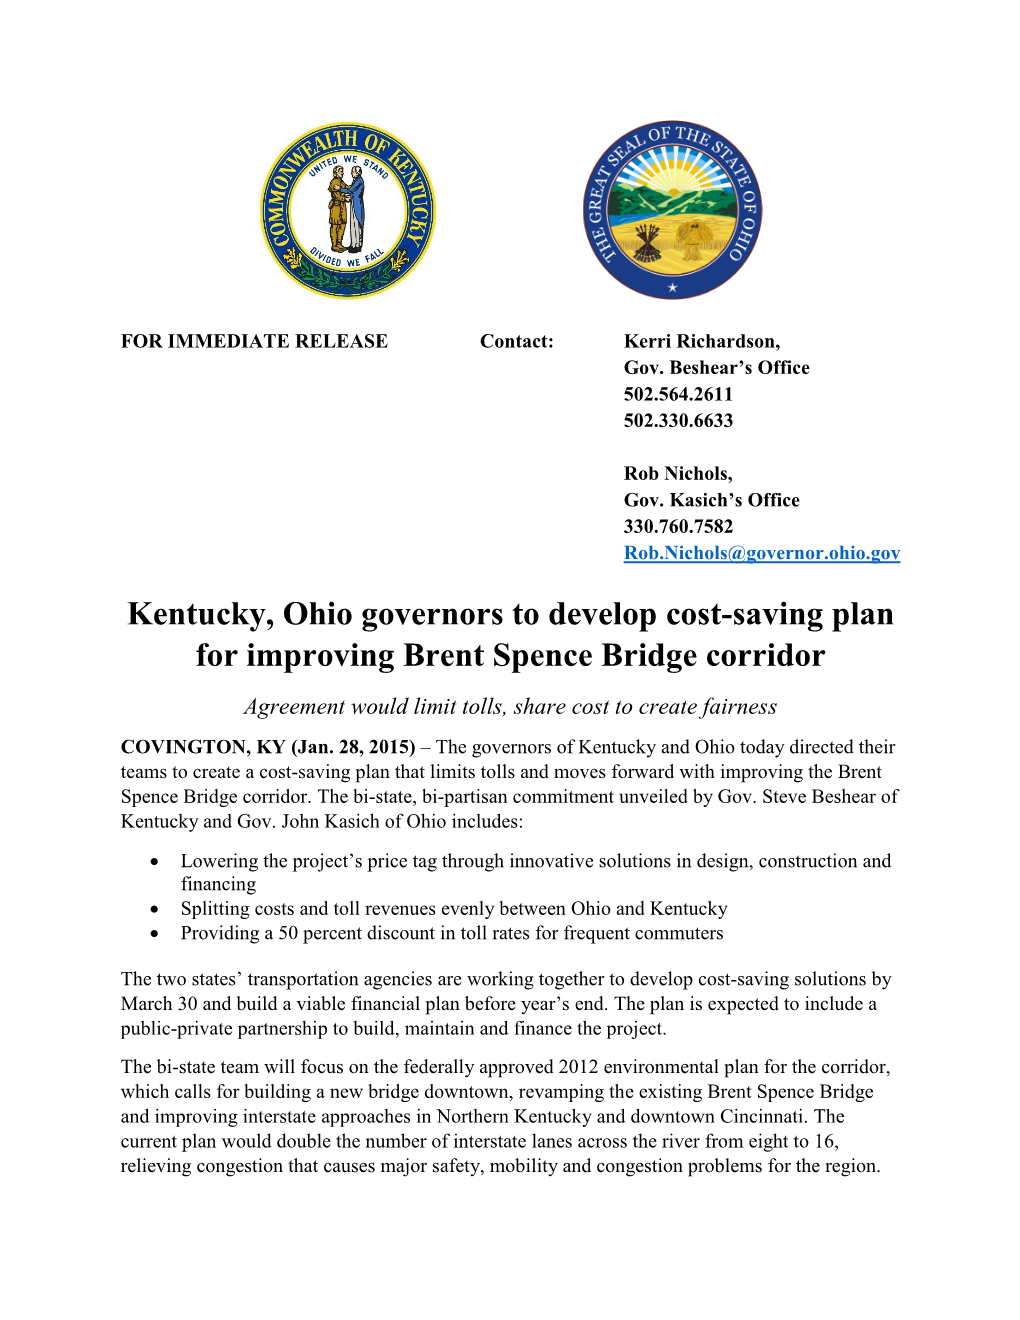 Kentucky, Ohio Governors to Develop Cost-Saving Plan for Improving Brent Spence Bridge Corridor